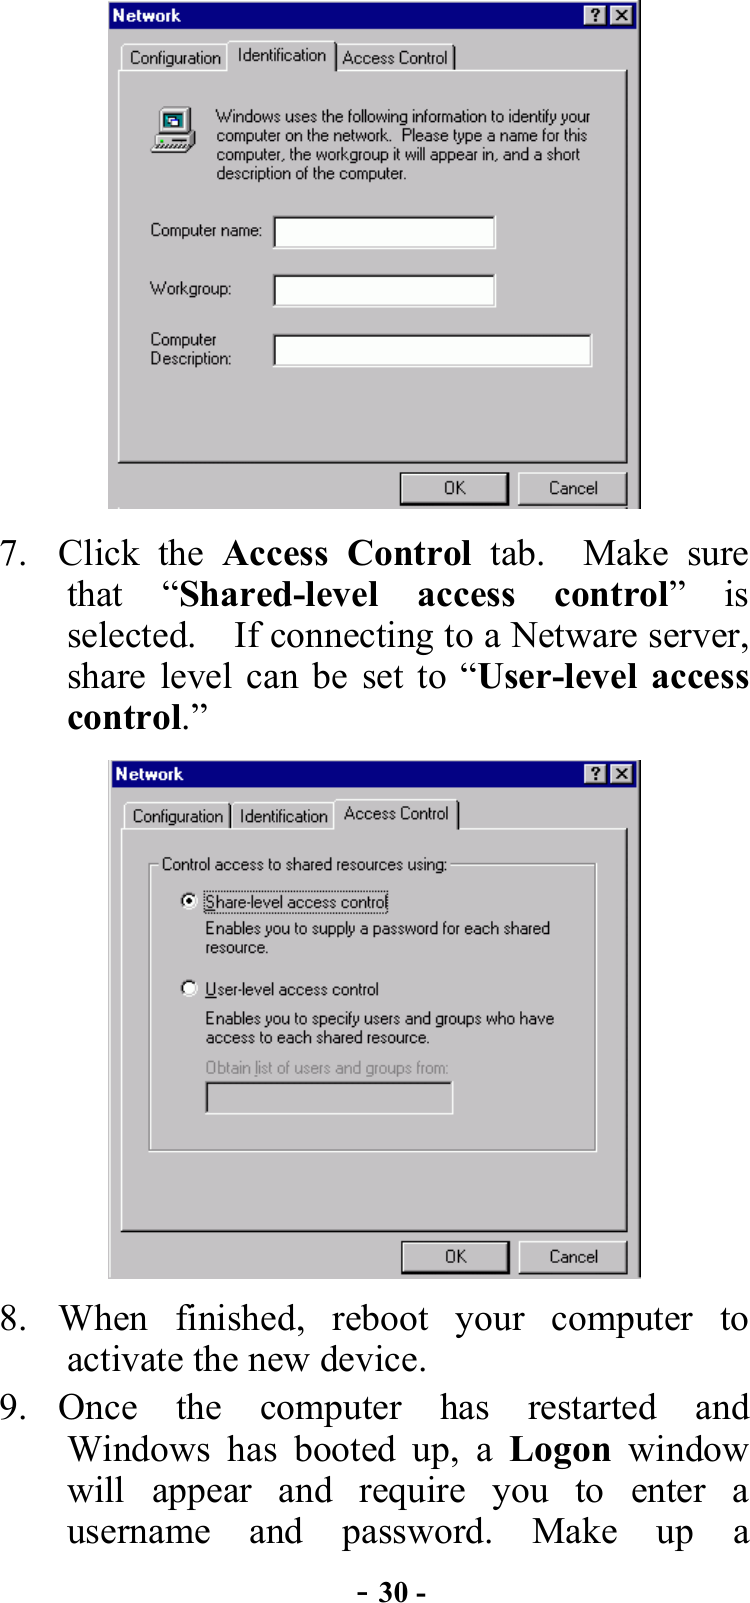  - 30 -  7. Click the Access Control tab.  Make sure that “Shared-level access control” is selected.  If connecting to a Netware server, share level can be set to “User-level access control.”   8. When finished, reboot your computer to activate the new device. 9. Once the computer has restarted and Windows has booted up, a Logon window will appear and require you to enter a username and password. Make up a 